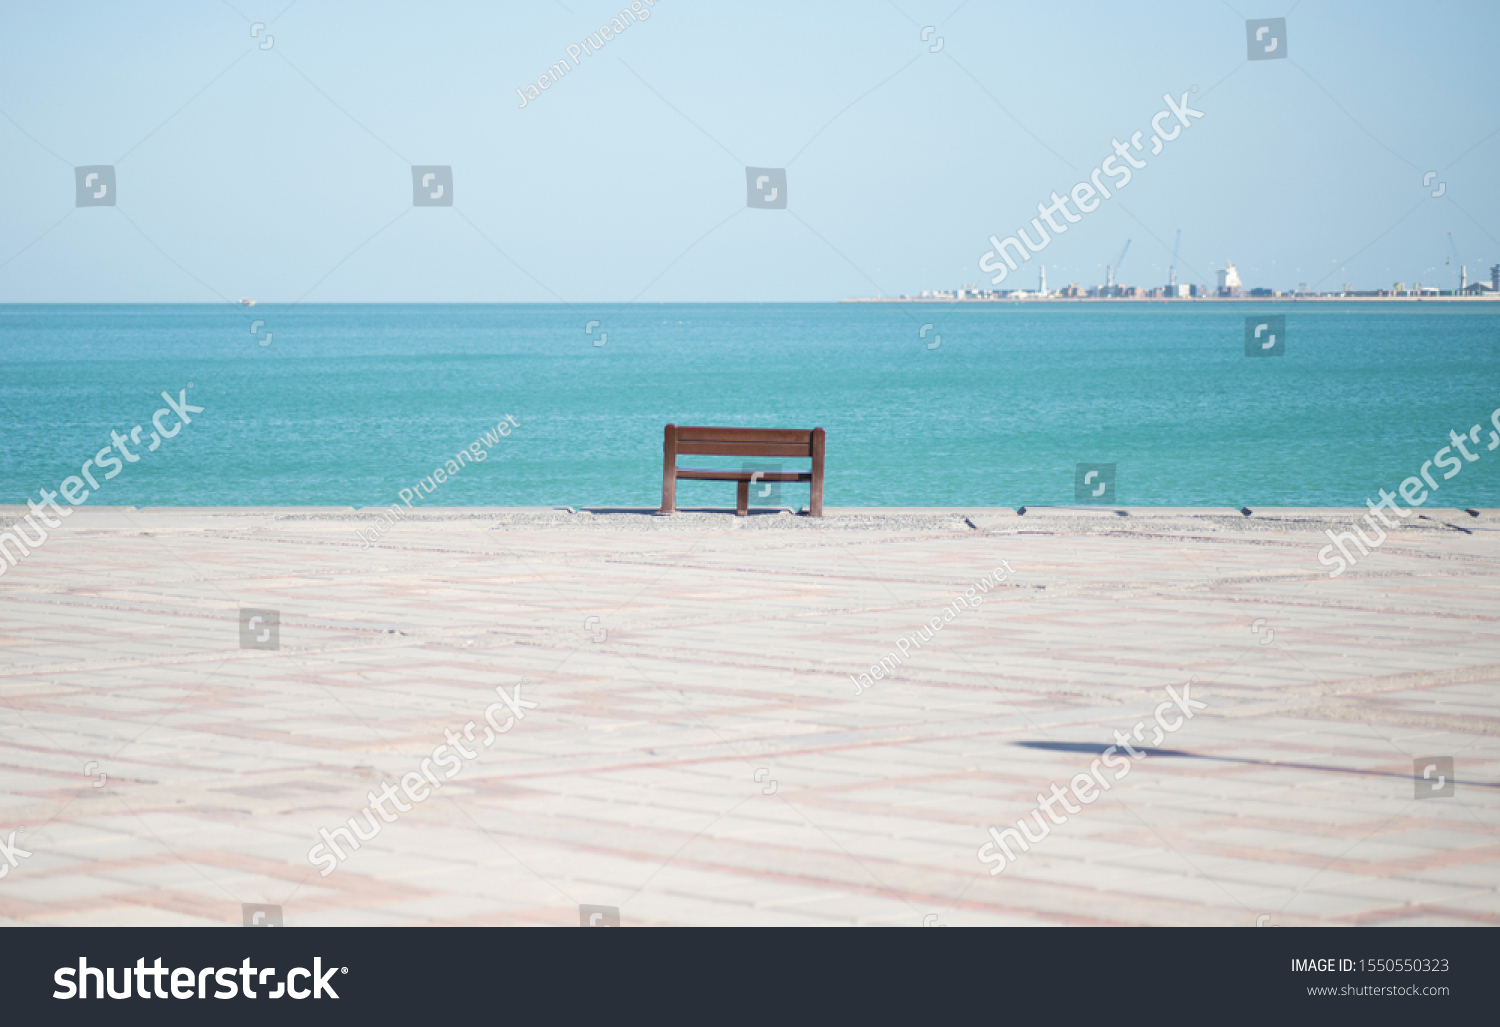 An empty chair along the Corniche or the boardwalk overlooking the sea or the bay in Doha Qatar #1550550323